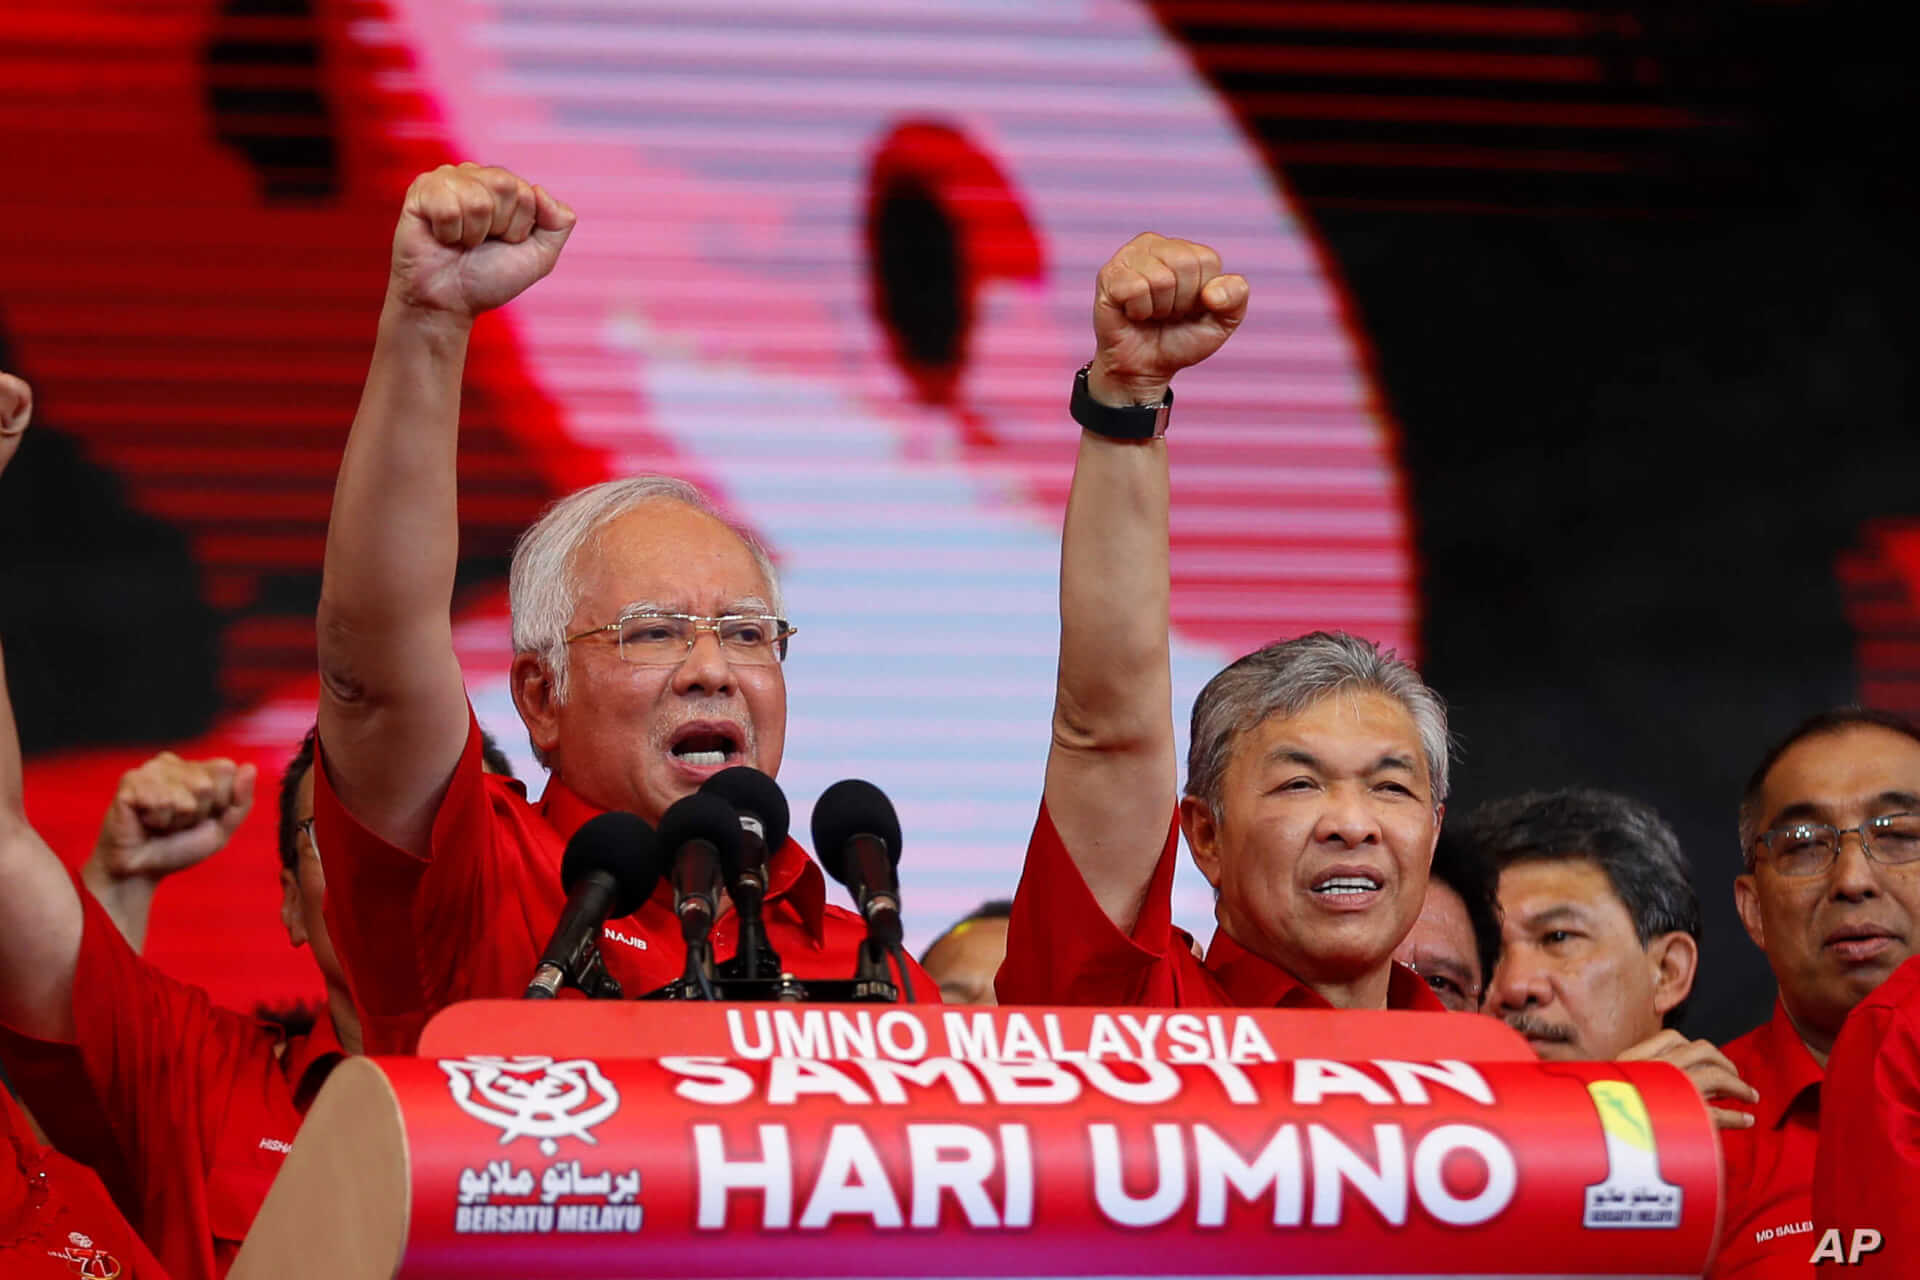 Malaysian PM Muhyiddin Will Be Able To Exercise Powers Even After UMNO Withdraws Support